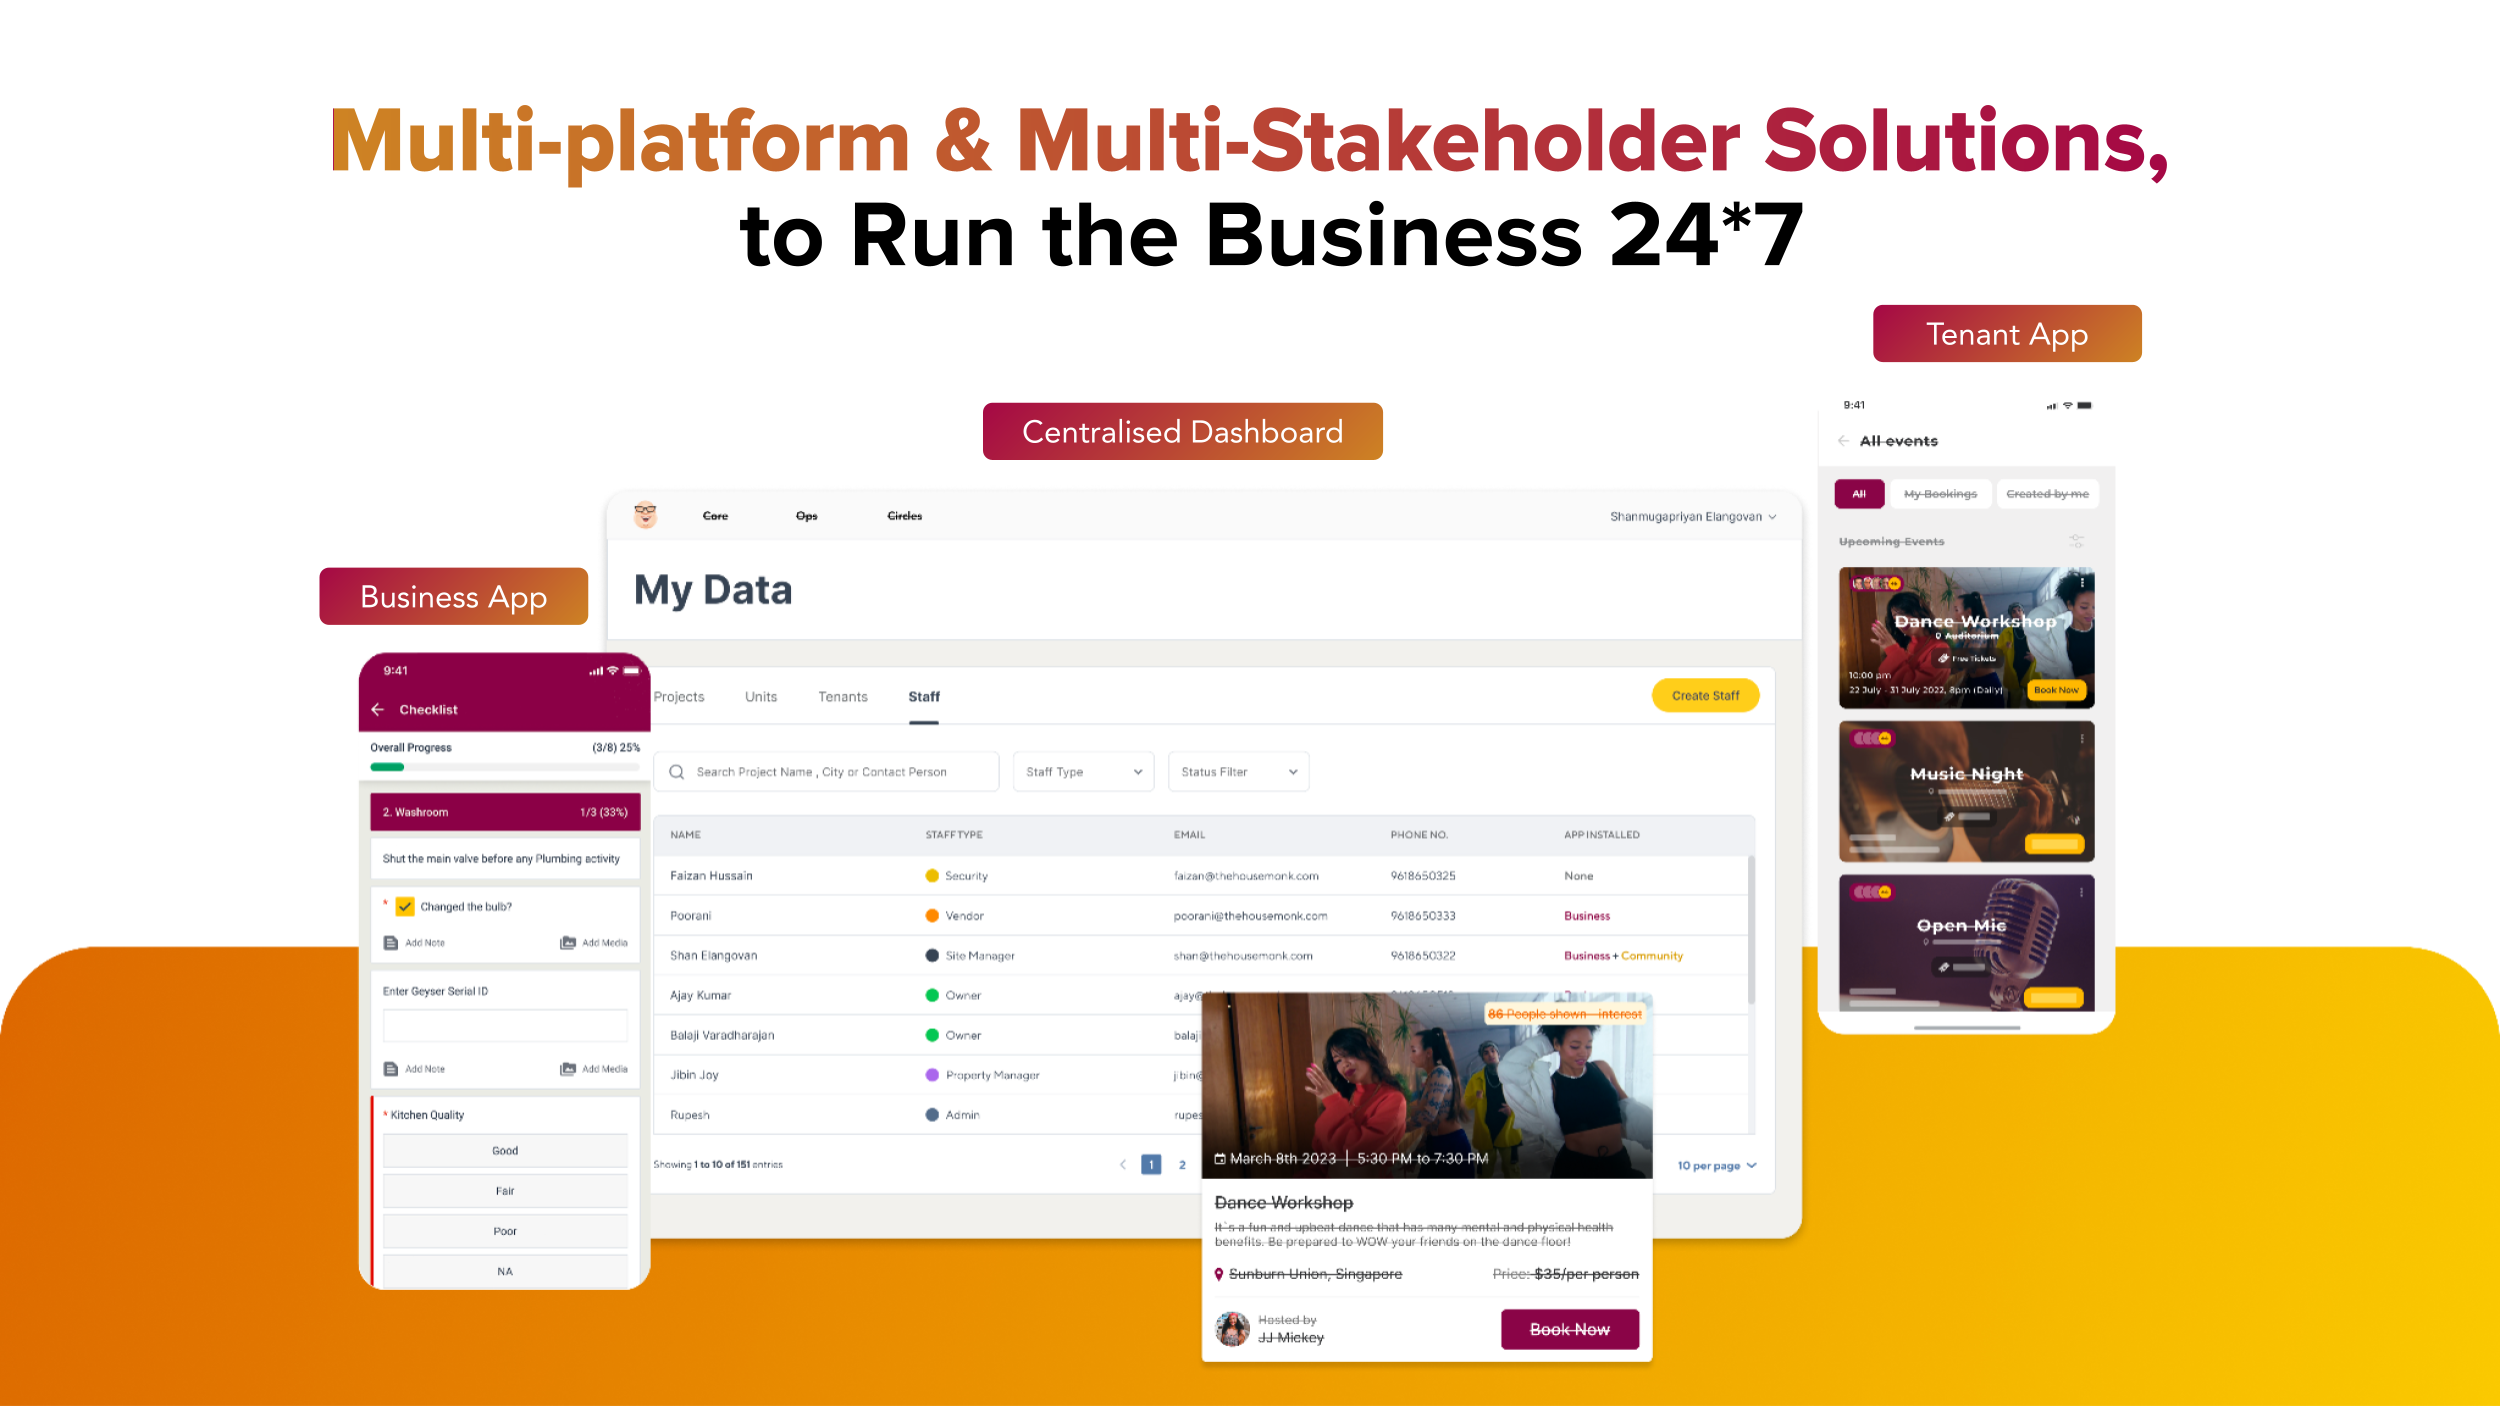 Multi-platform Solutions with Centralised Dashboard, Business App and Tenant App